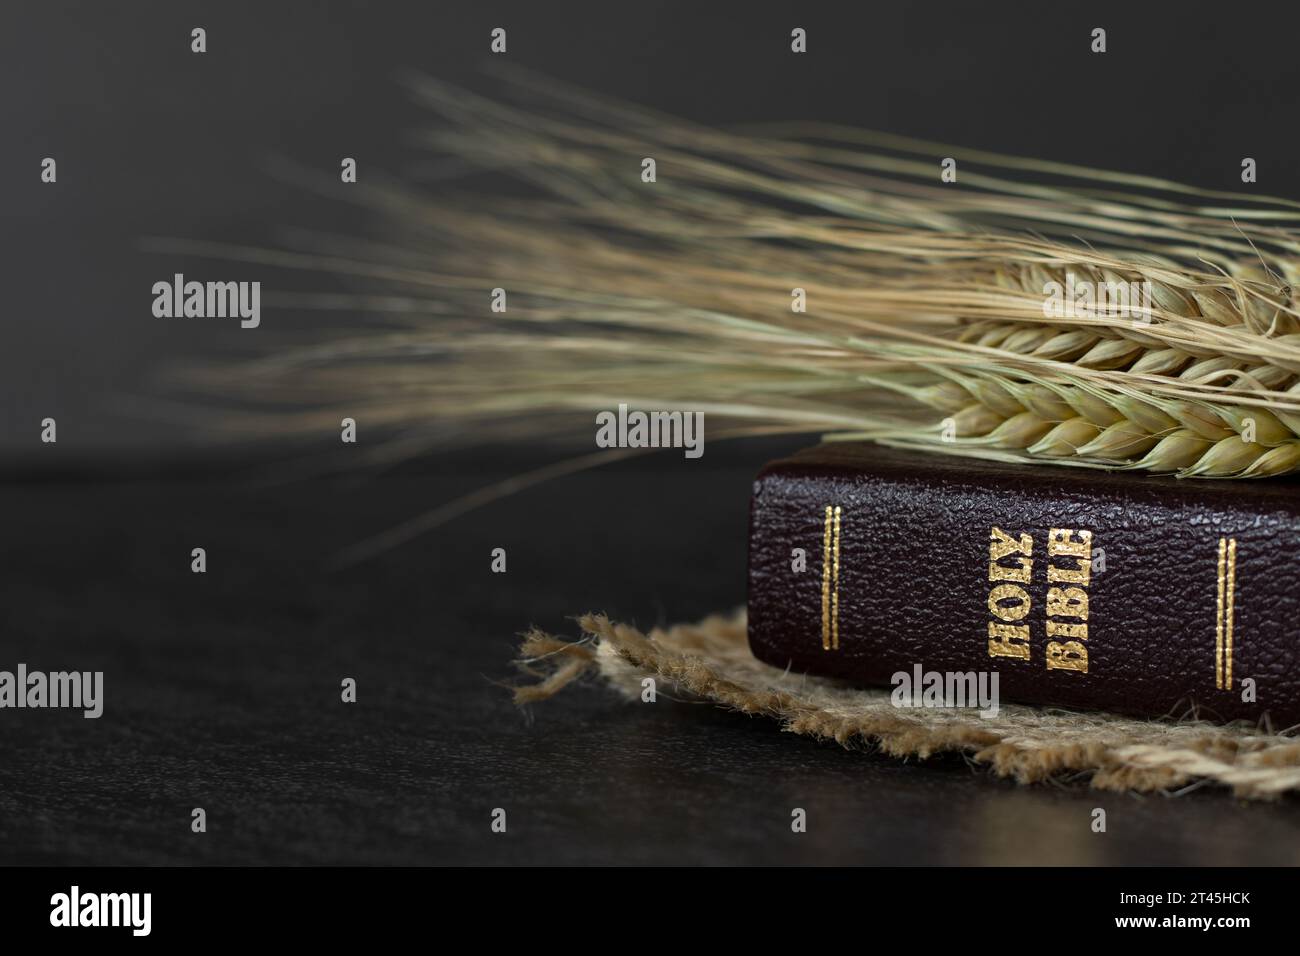 Ears of barley on closed holy bible book with golden text on dark background. Close-up. Spring harvest season, Christian spiritual firstfruits concept. Stock Photo